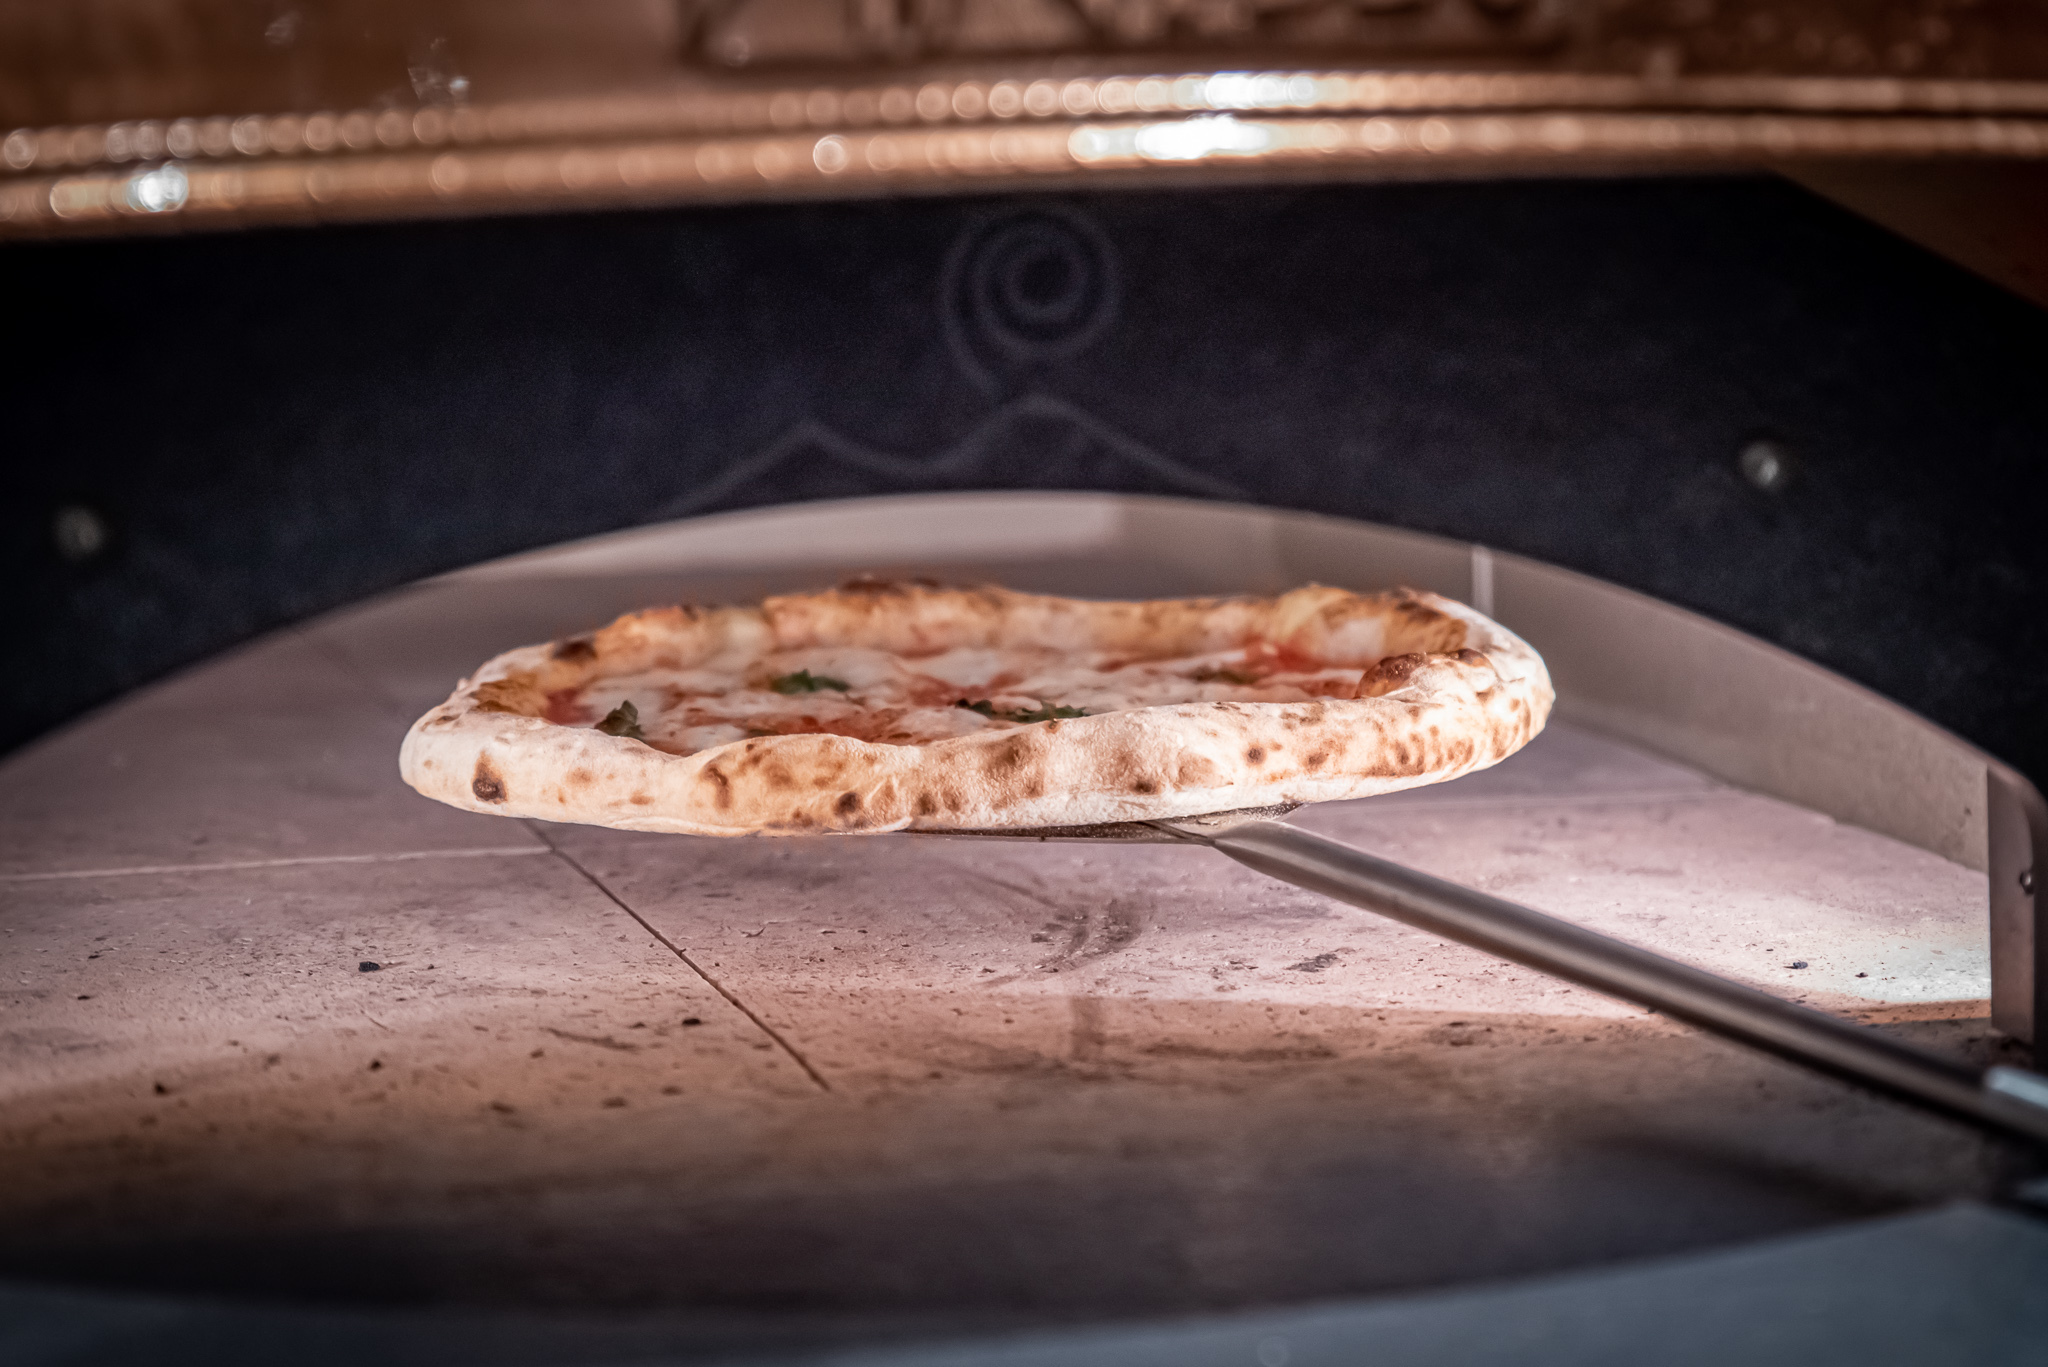 One of the pizza dishes that will be available at the new Augusto restaurant. Picture: Carlo Cerutti.